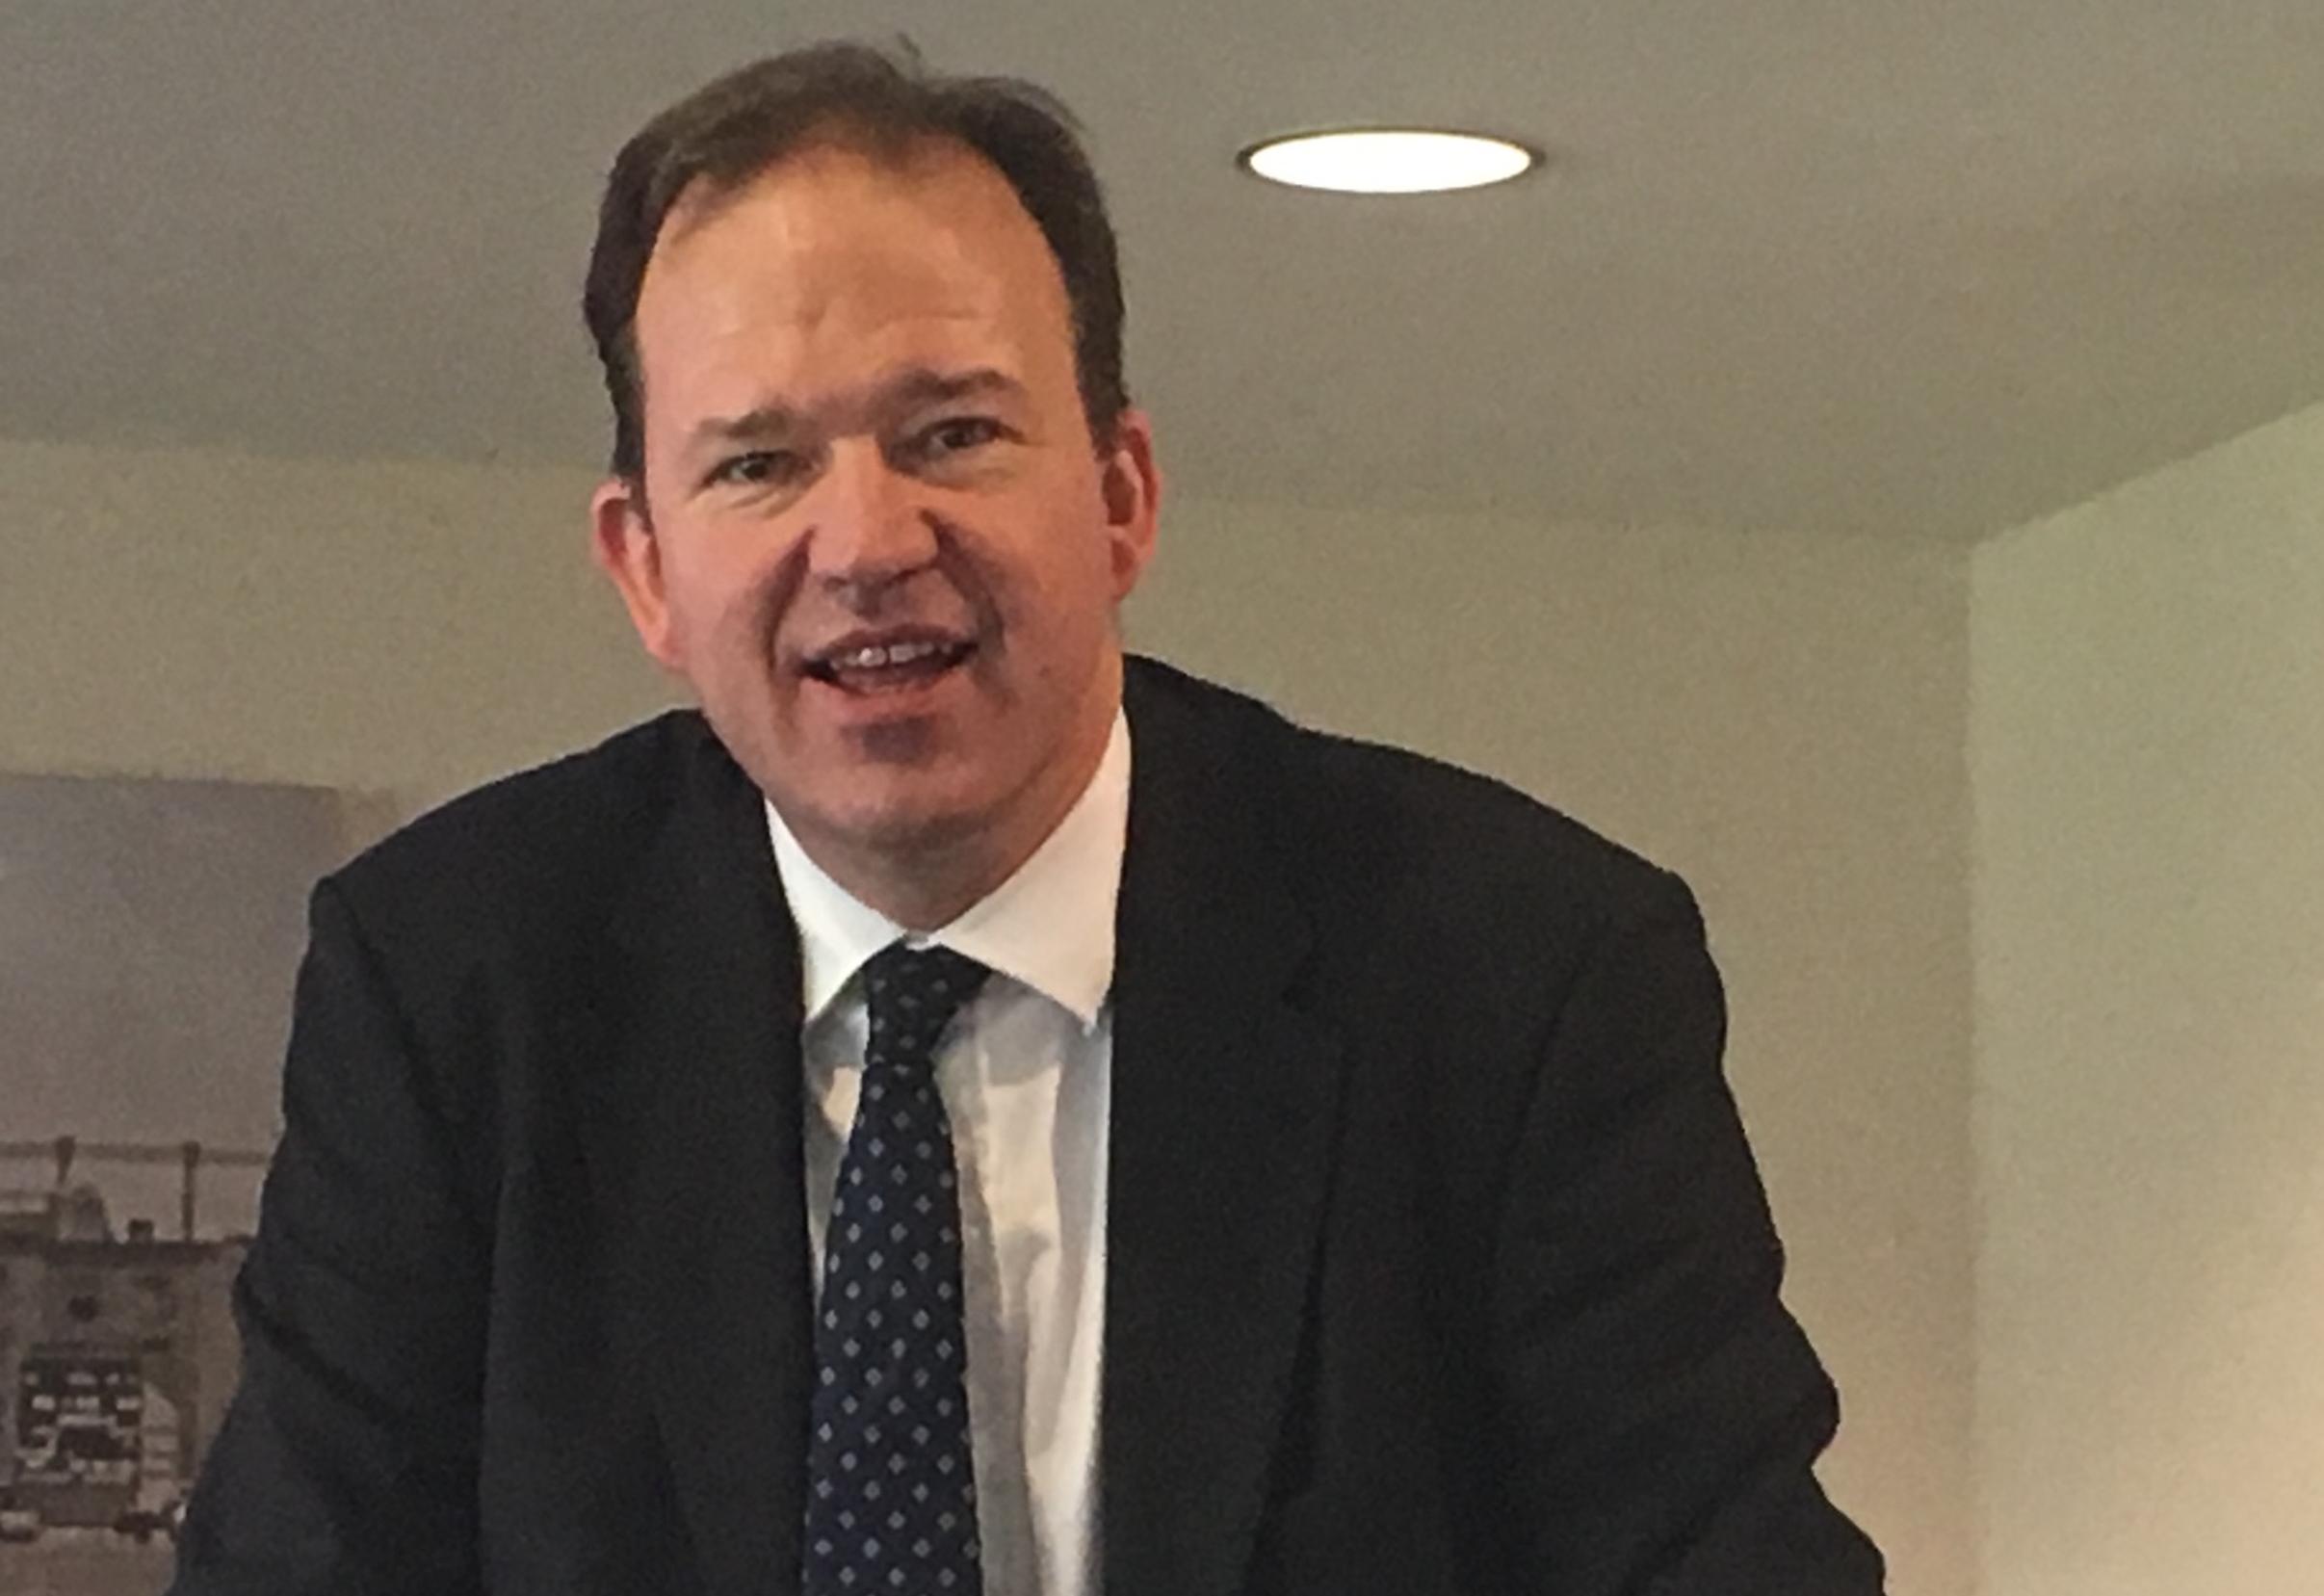 Jesse Norman, Future of Mobility Minister: `This funding will support almost 4,000 ultra low emission vehicles across the country. It is a further sign that the UK is making real progress in the transition to greener transport`